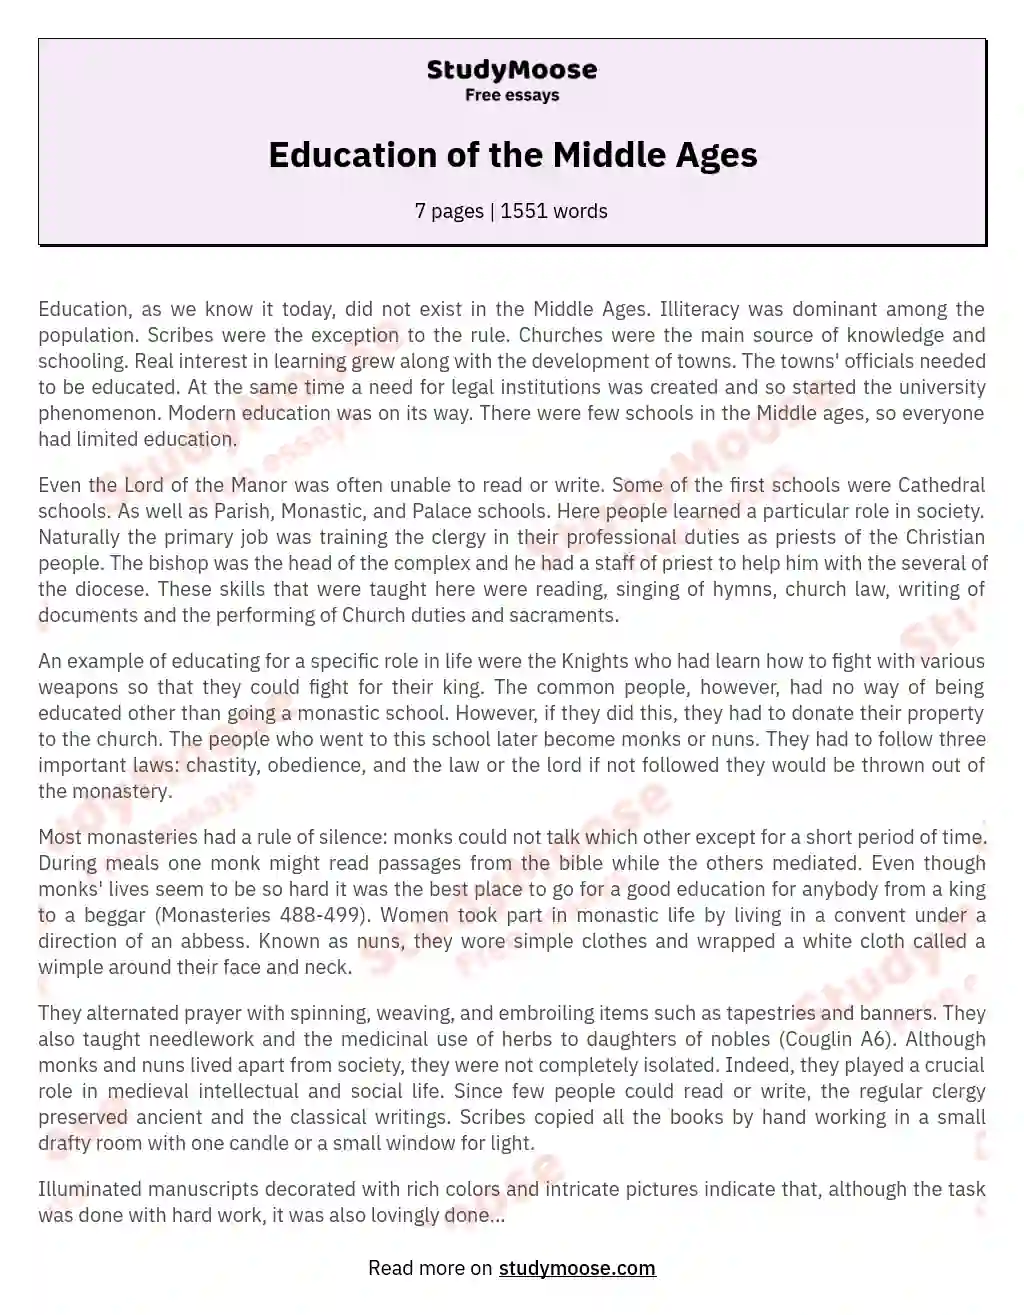 Education of the Middle Ages essay